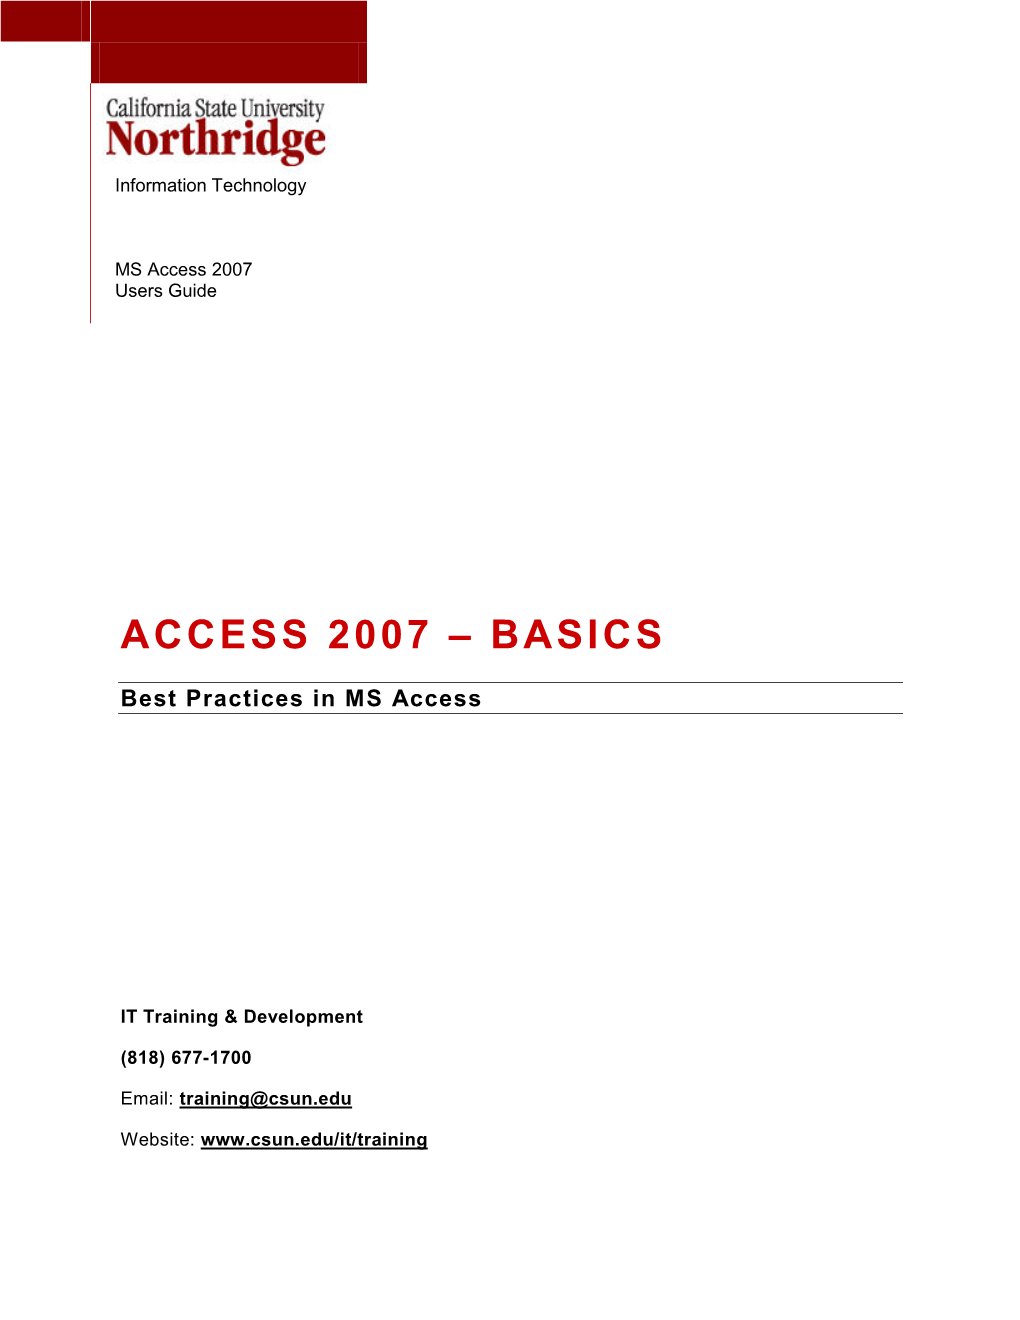 Access 2007 Users Guide